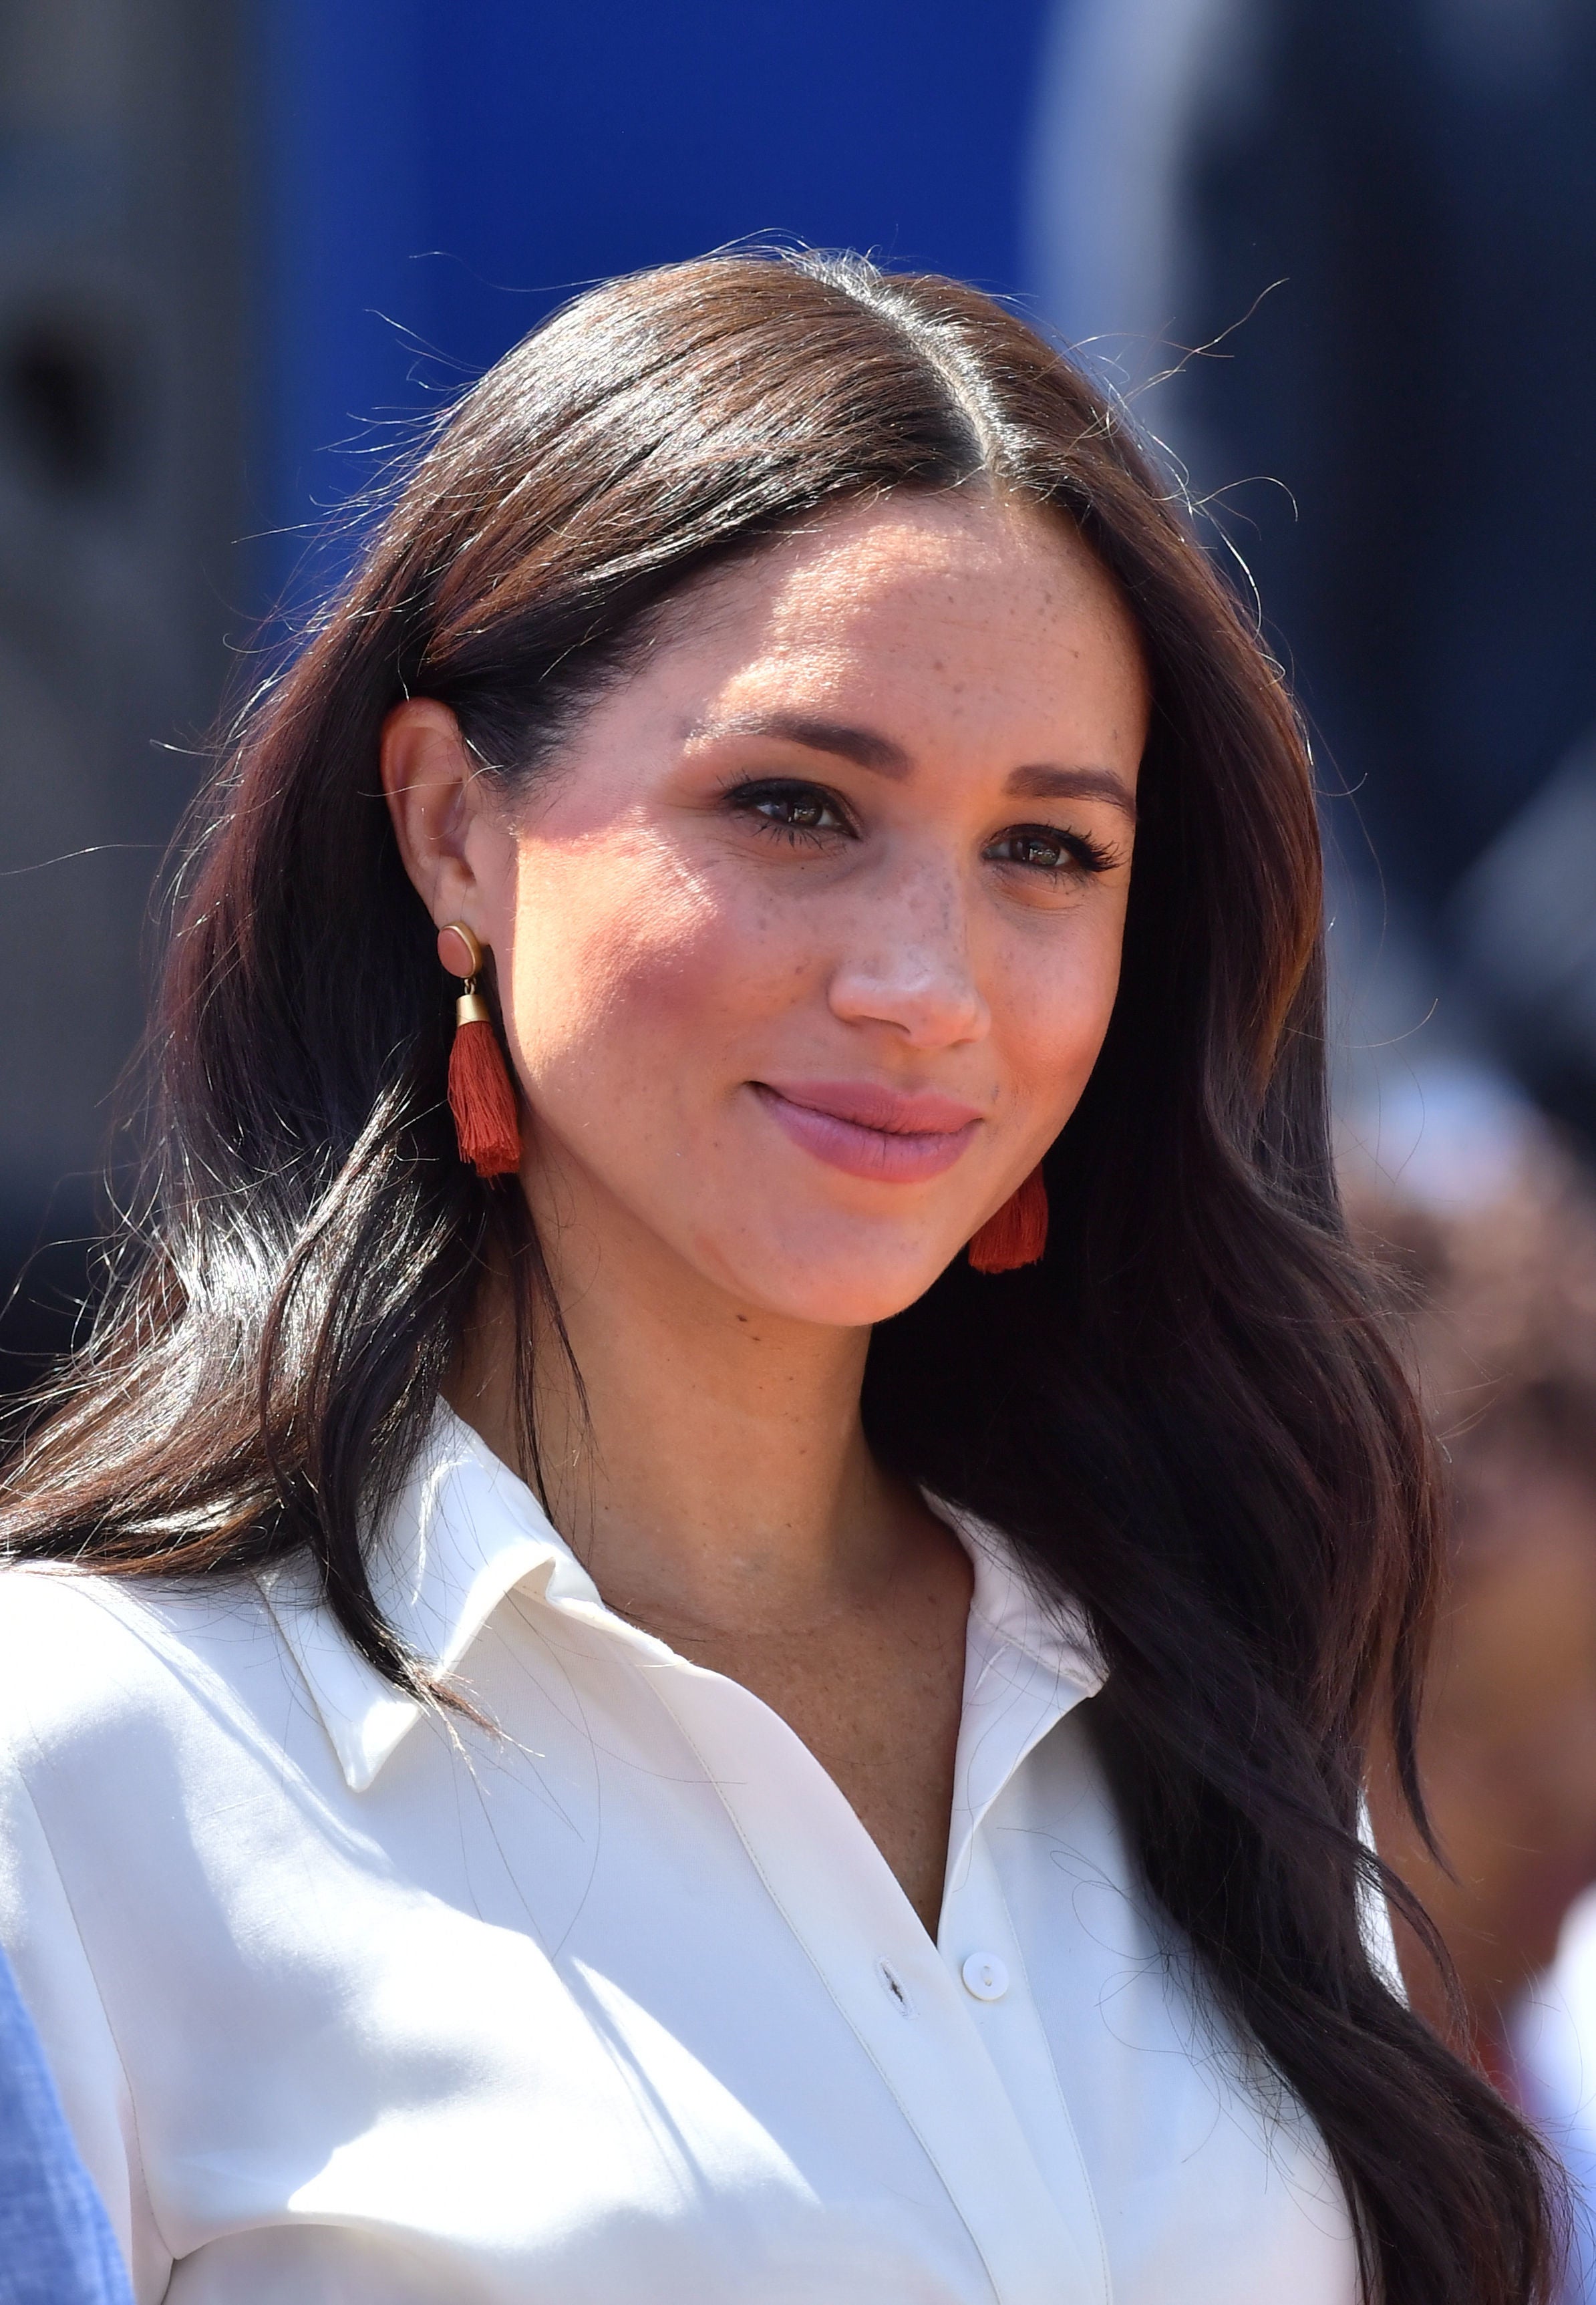 The court ruled on Friday that Associated Newspapers Limited misused the Duchess of Sussex’s private information and infringed her copyright